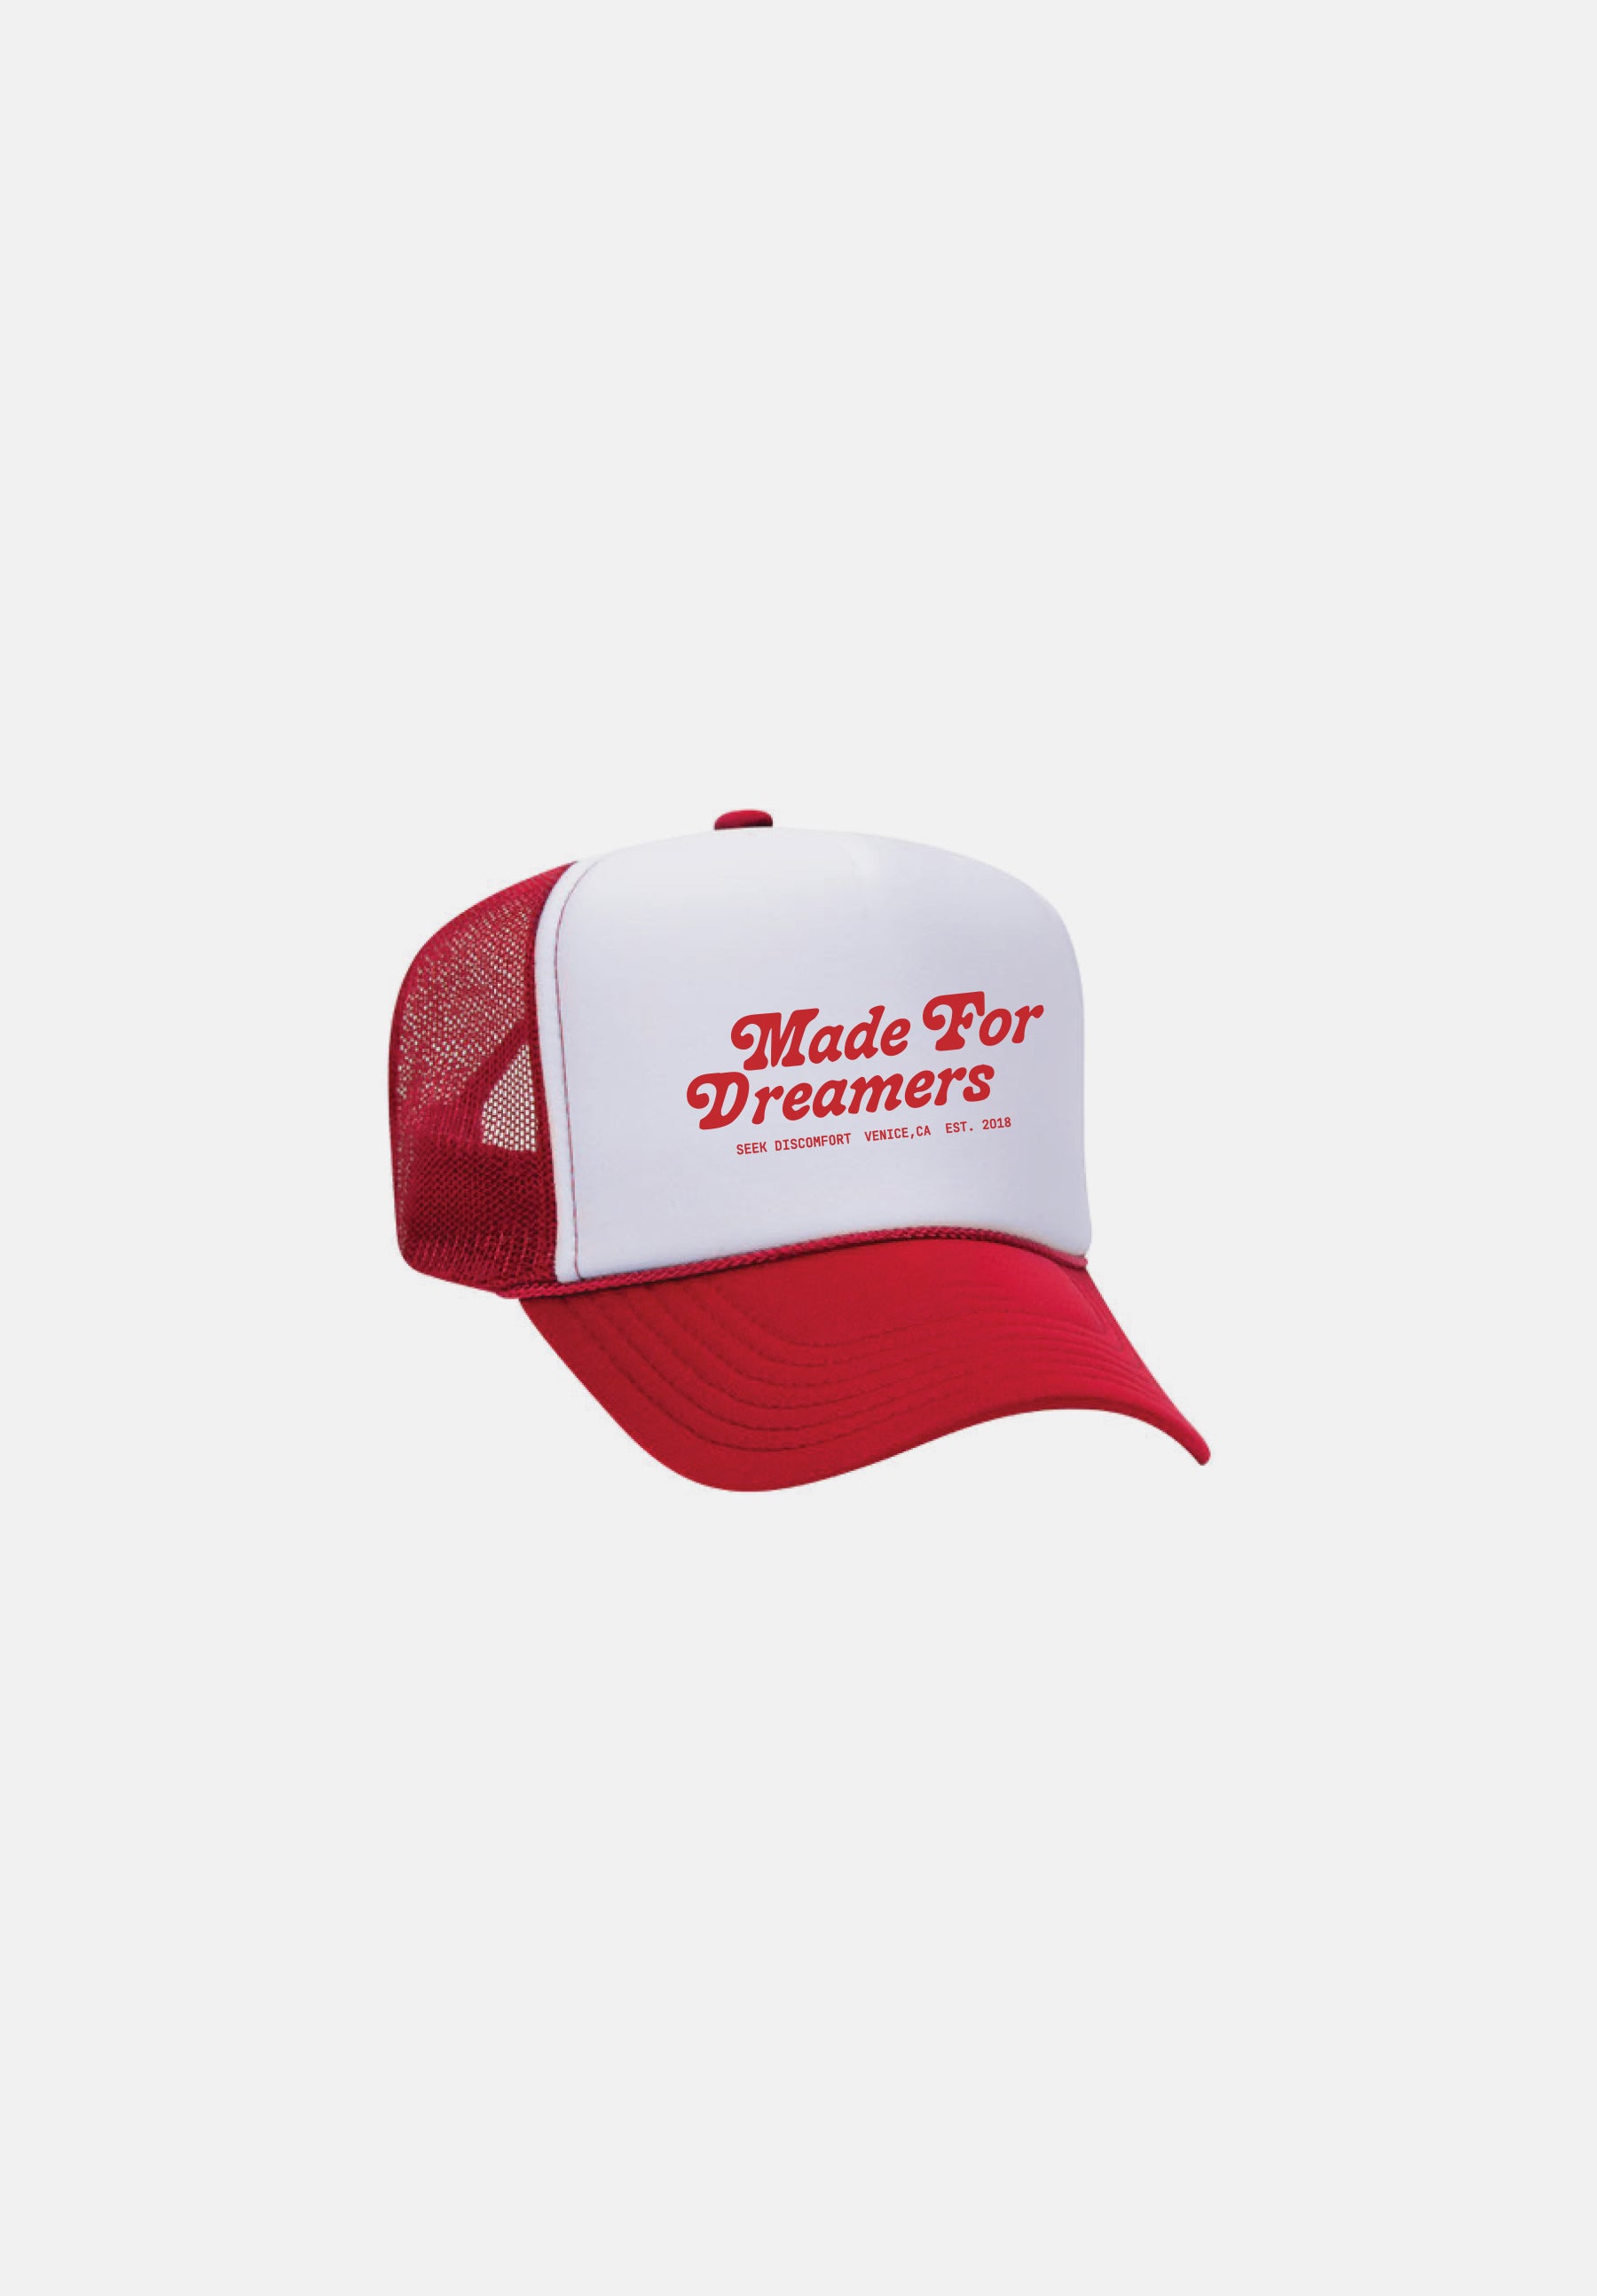 Trucker Hats [A Rad Guide, With Everything You Need To Know]